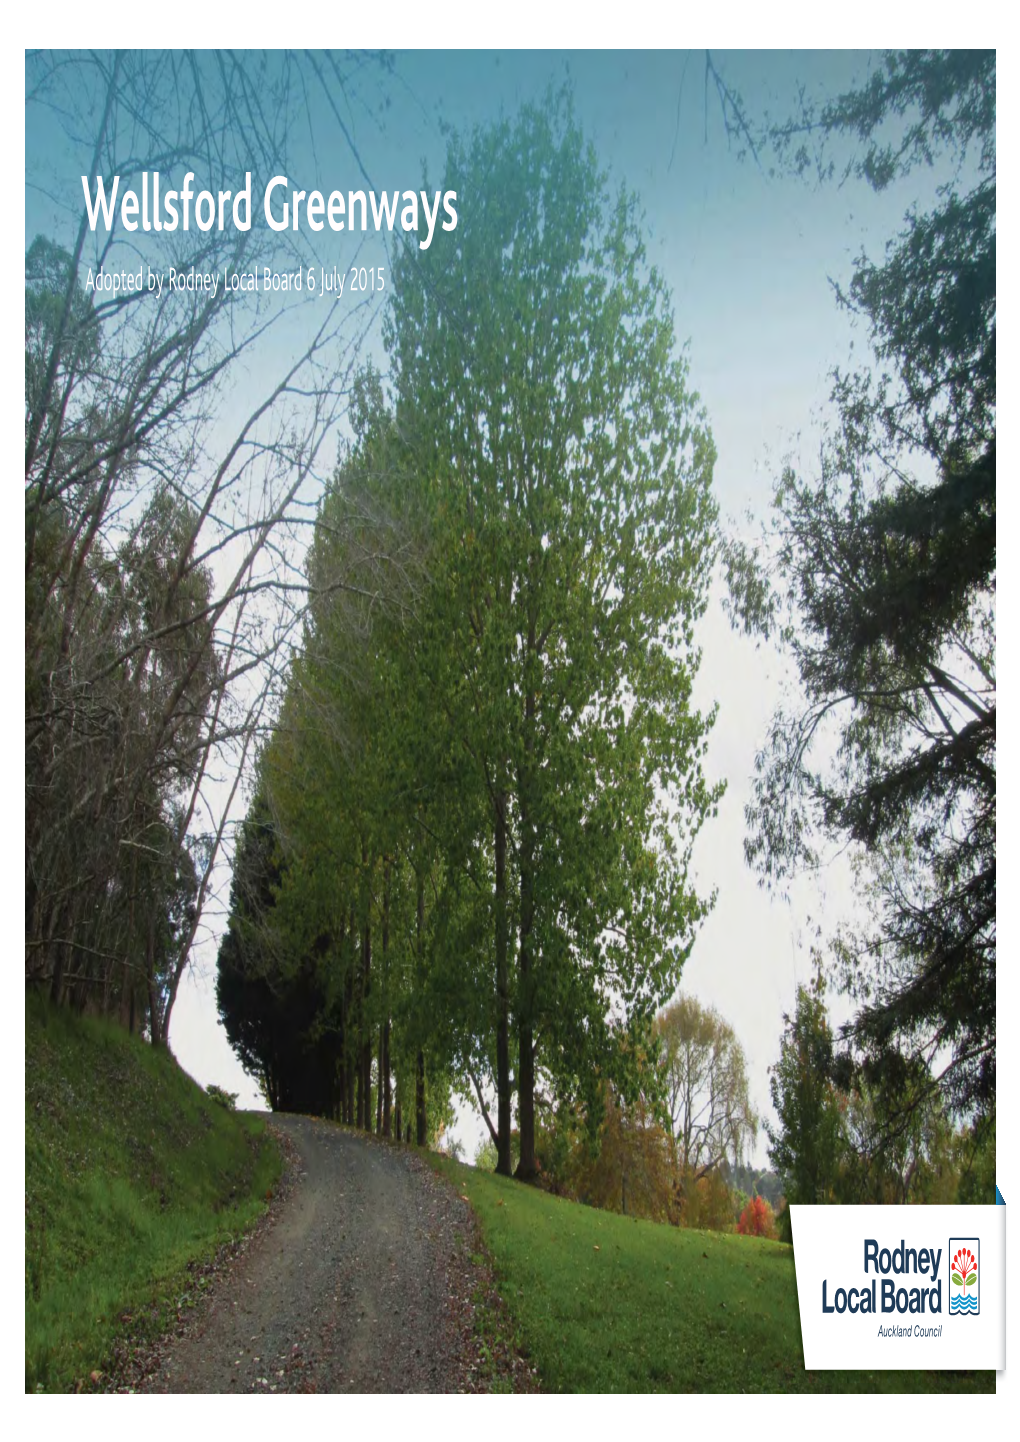 Wellsford Greenways Adopted by Rodney Local Board 6 July 2015 Front Cover: Wellsford Centennial Park